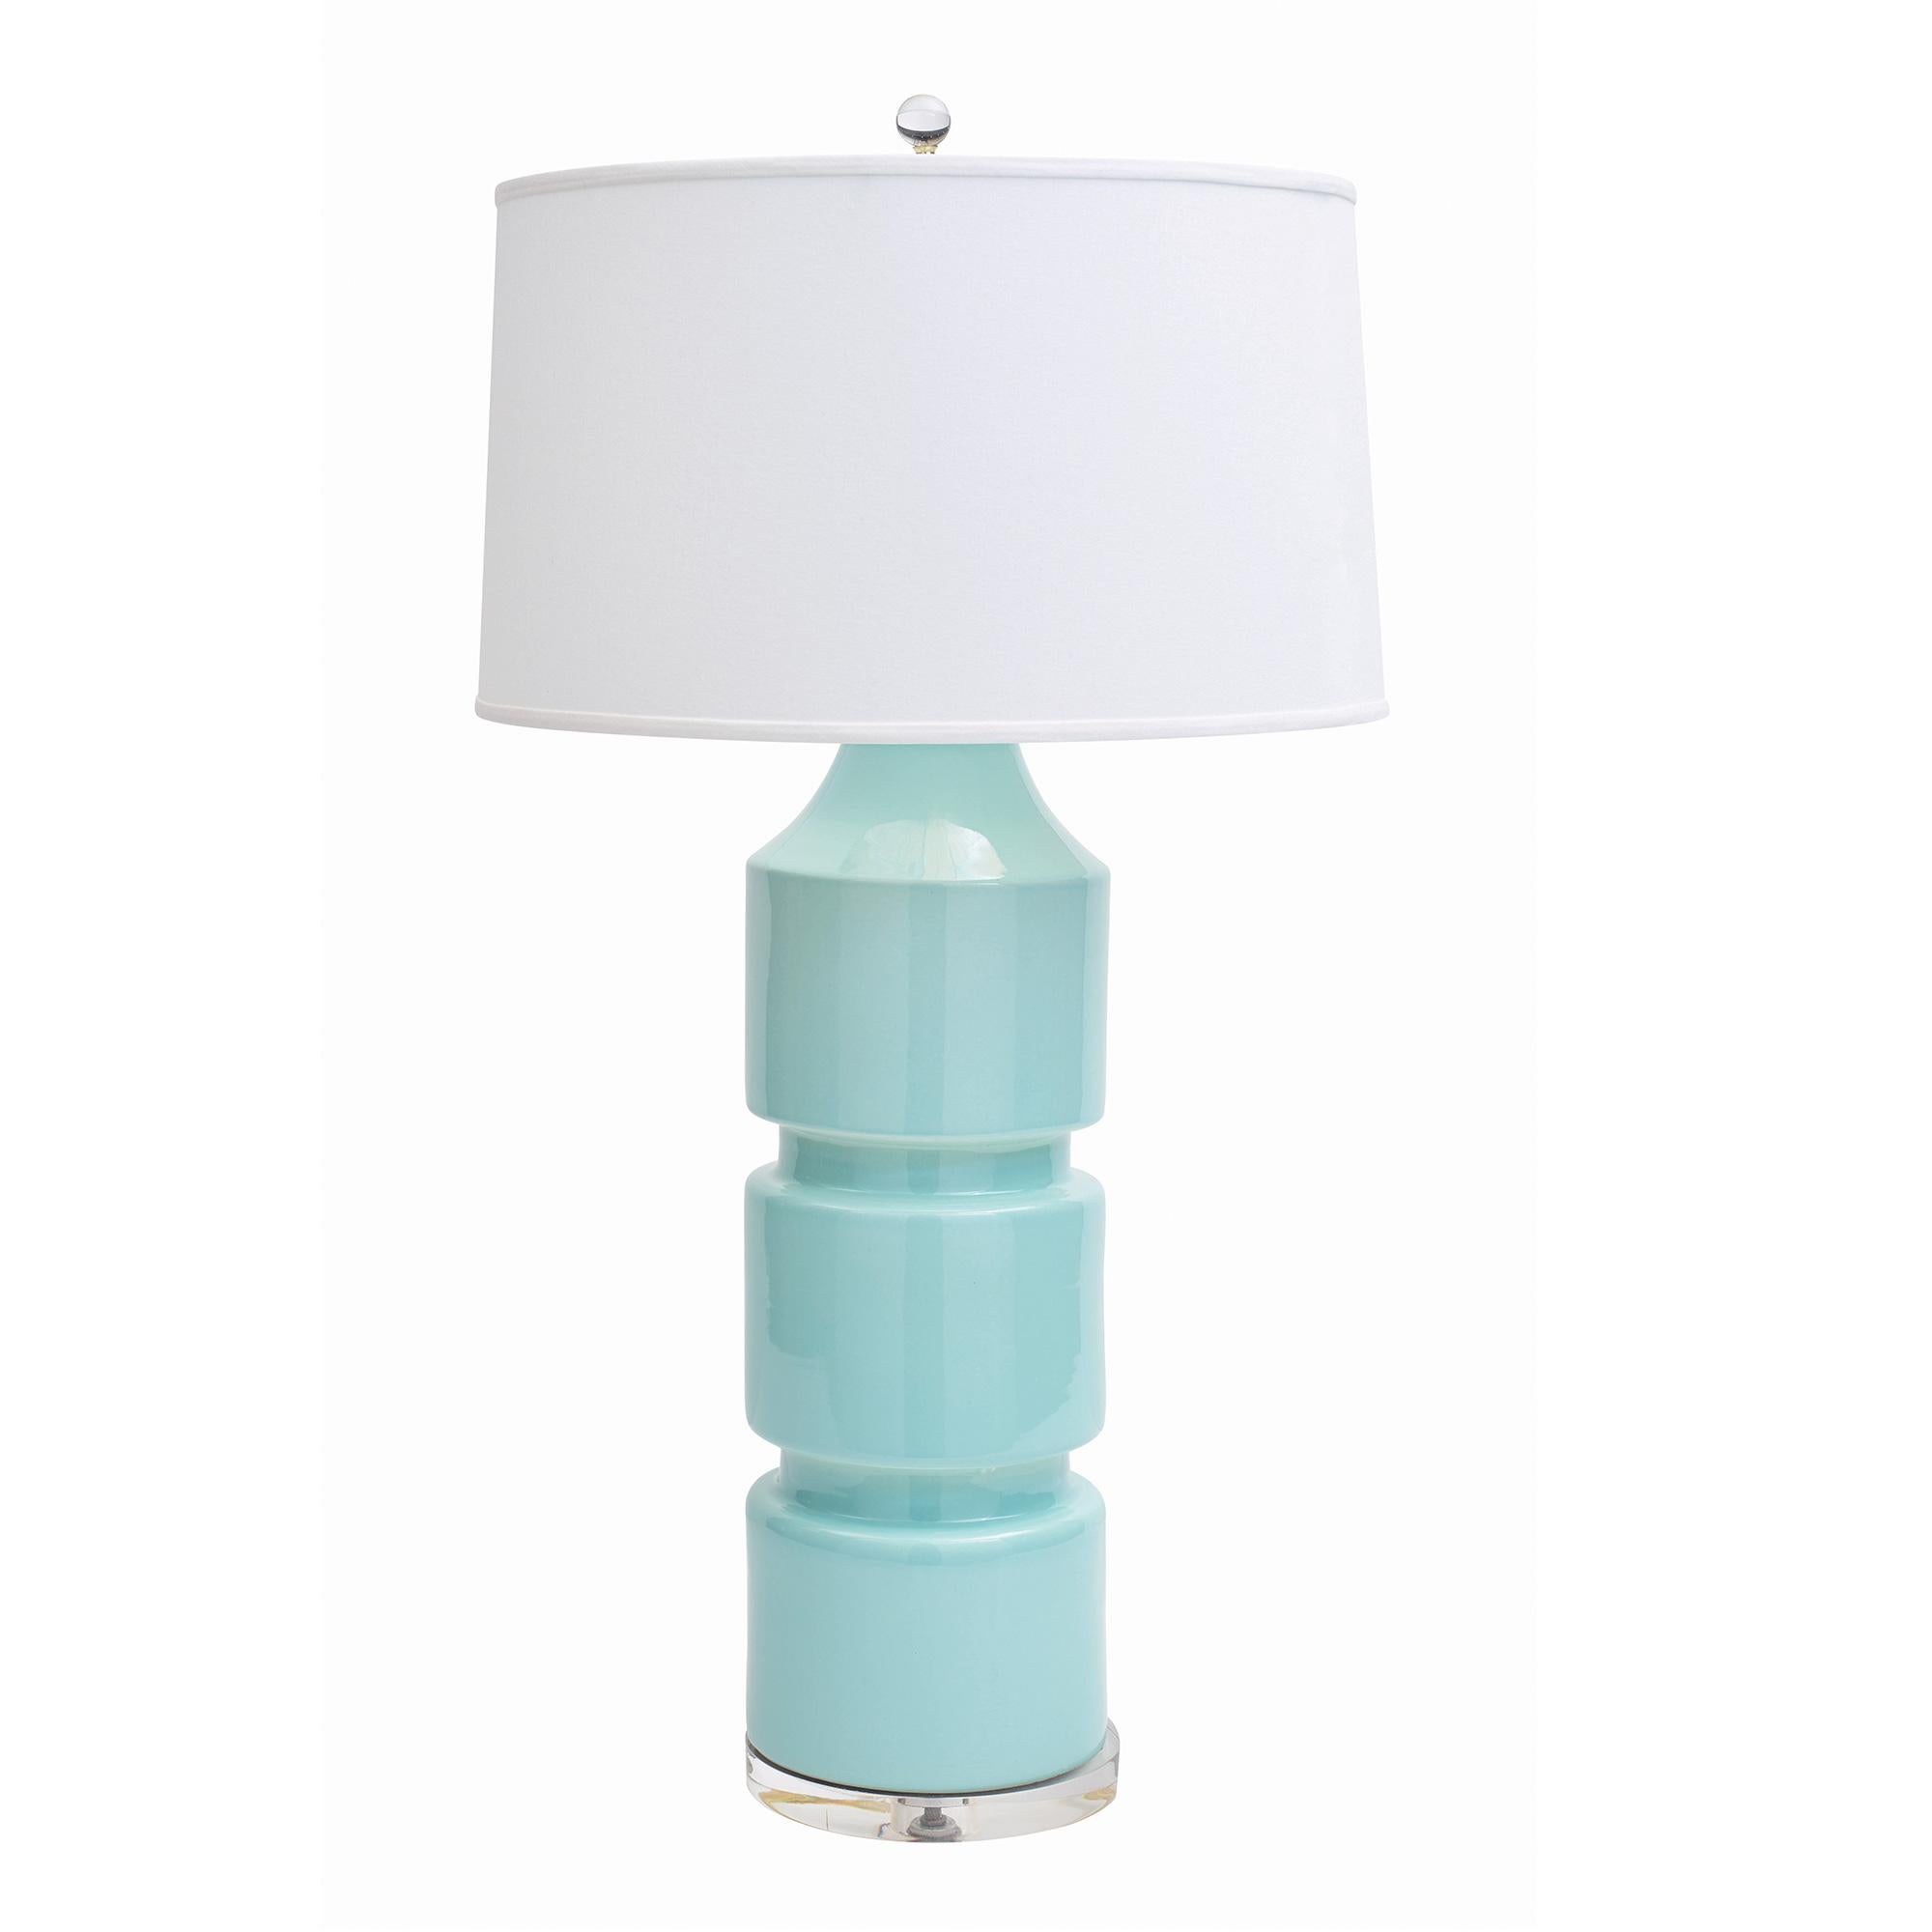 Blue (QR-20859.LTBLUE.0) Jan Showers Milan Ceramic Table Lamp with Ivory Linen Shade for Curatedkravet